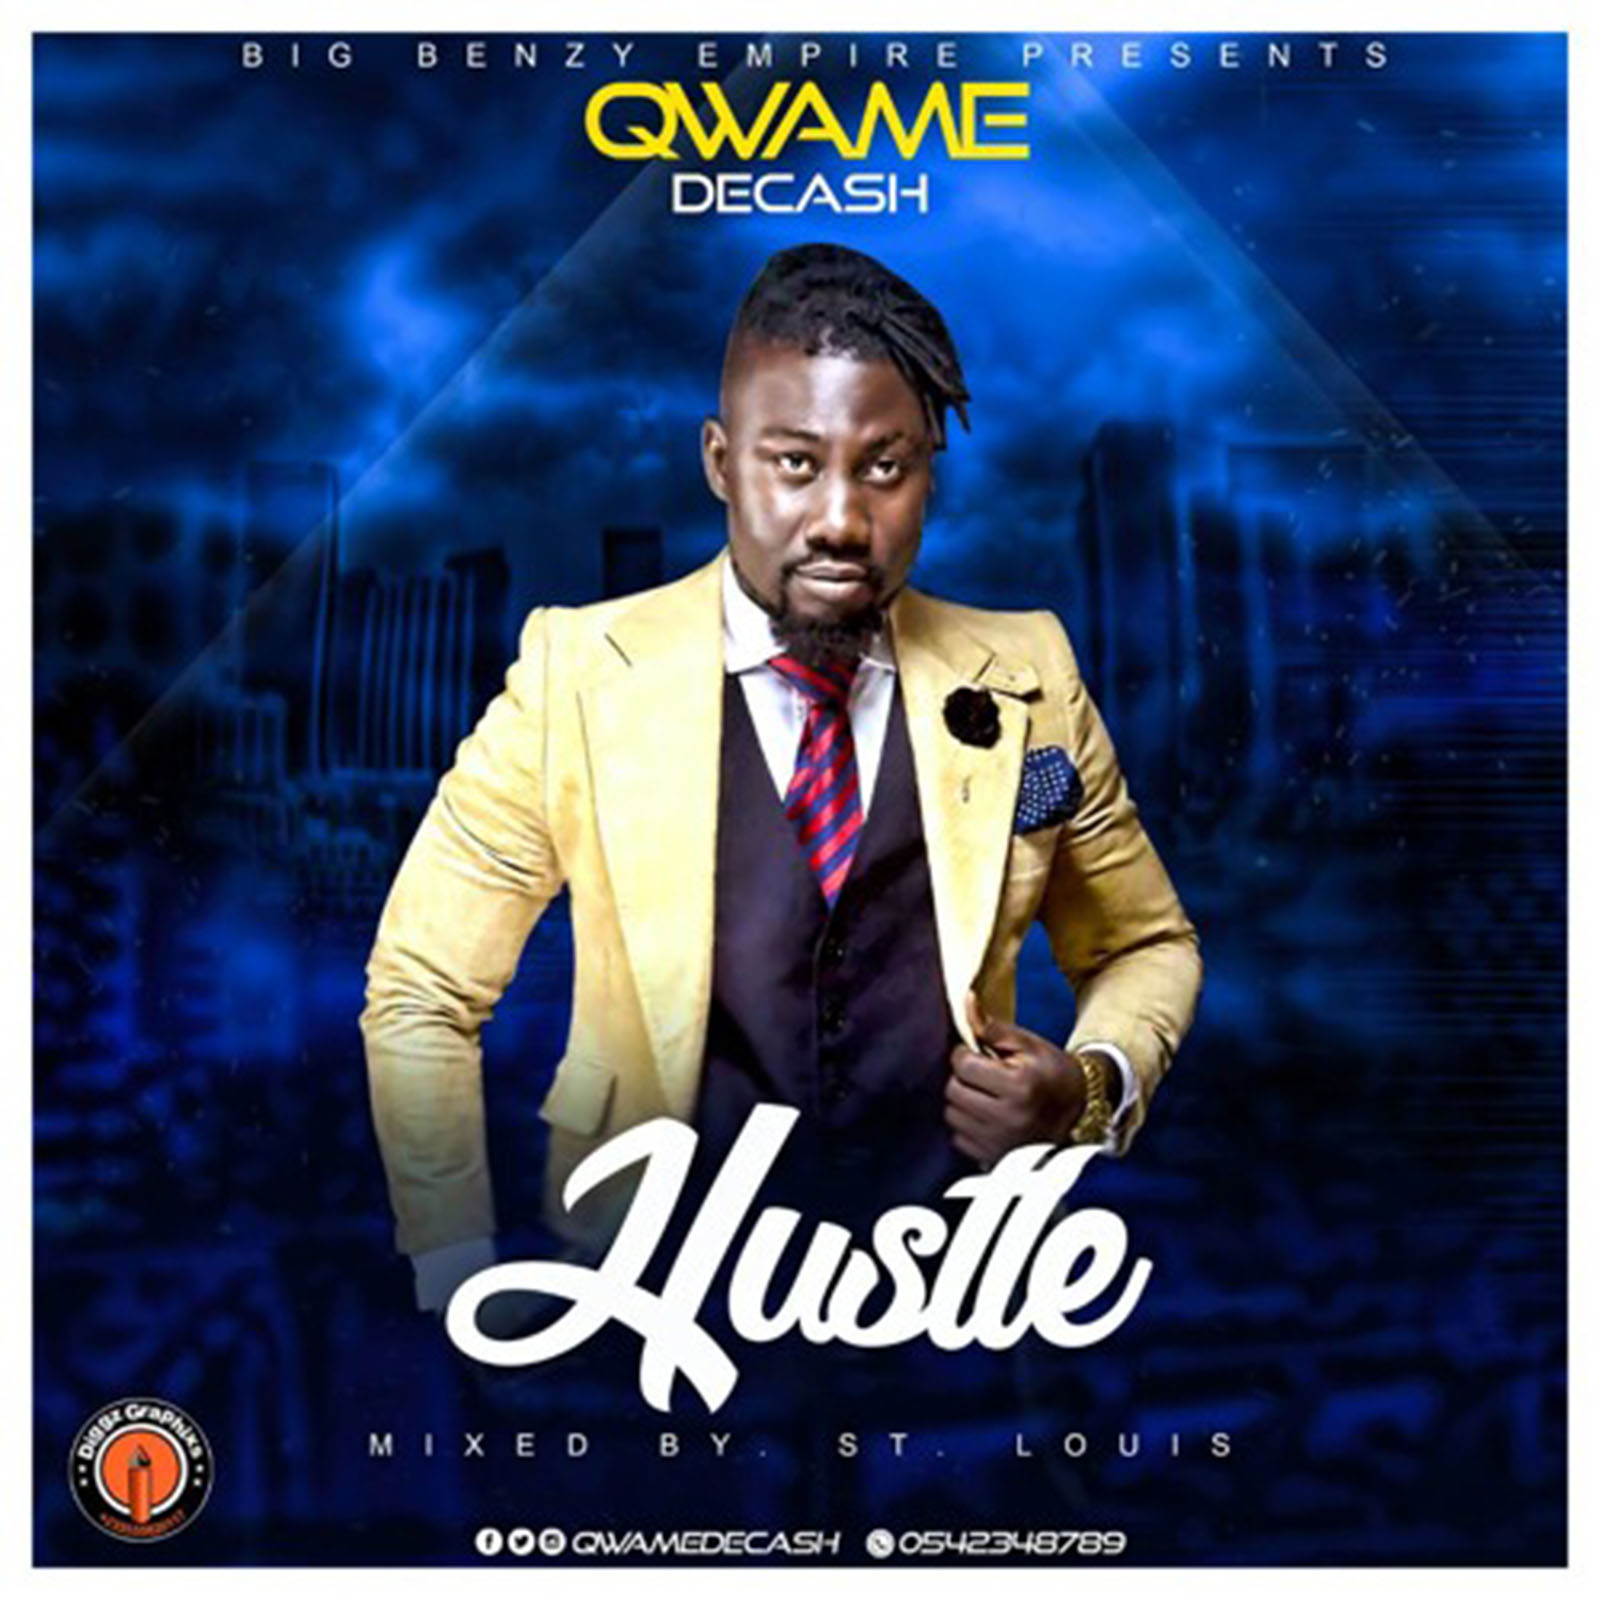 Hustle by Qwame Decash